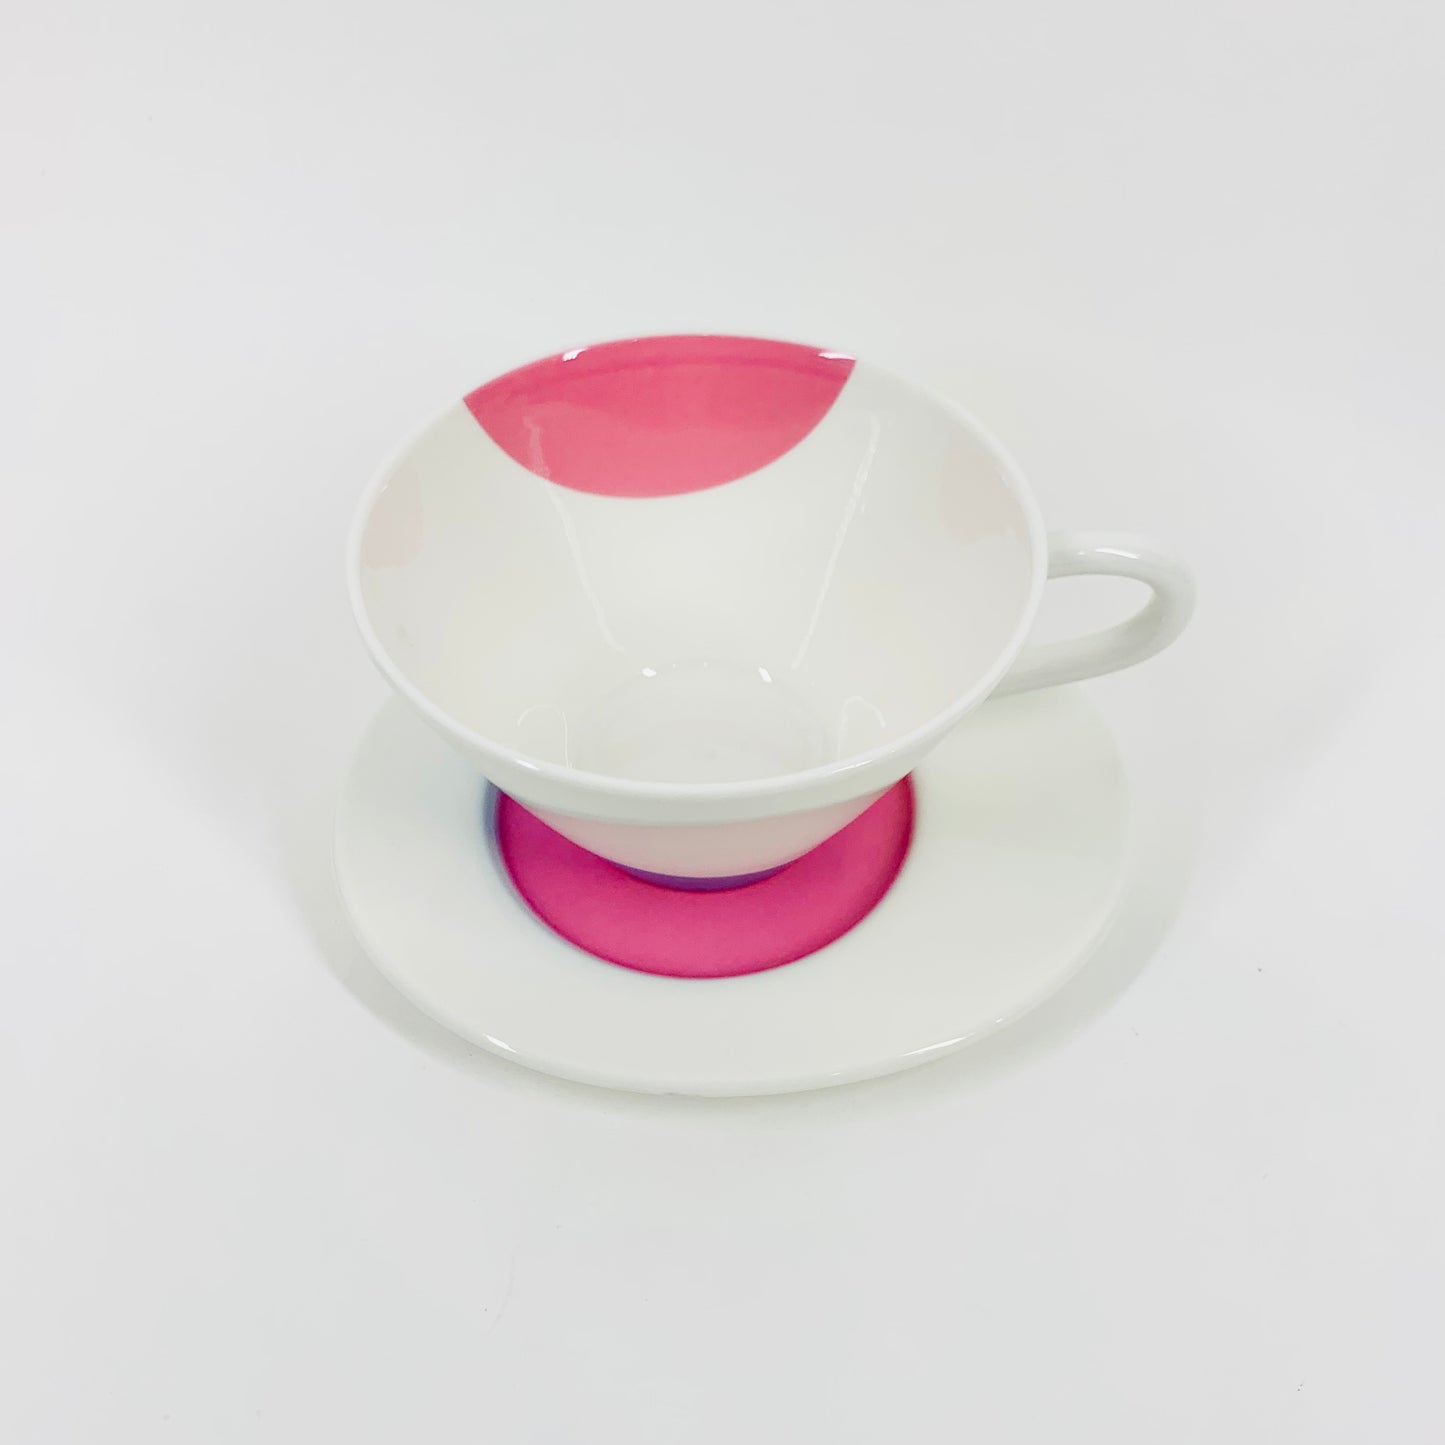 1980s Villeroy & Boch Memphis white porcelain coffee cup and matching saucer